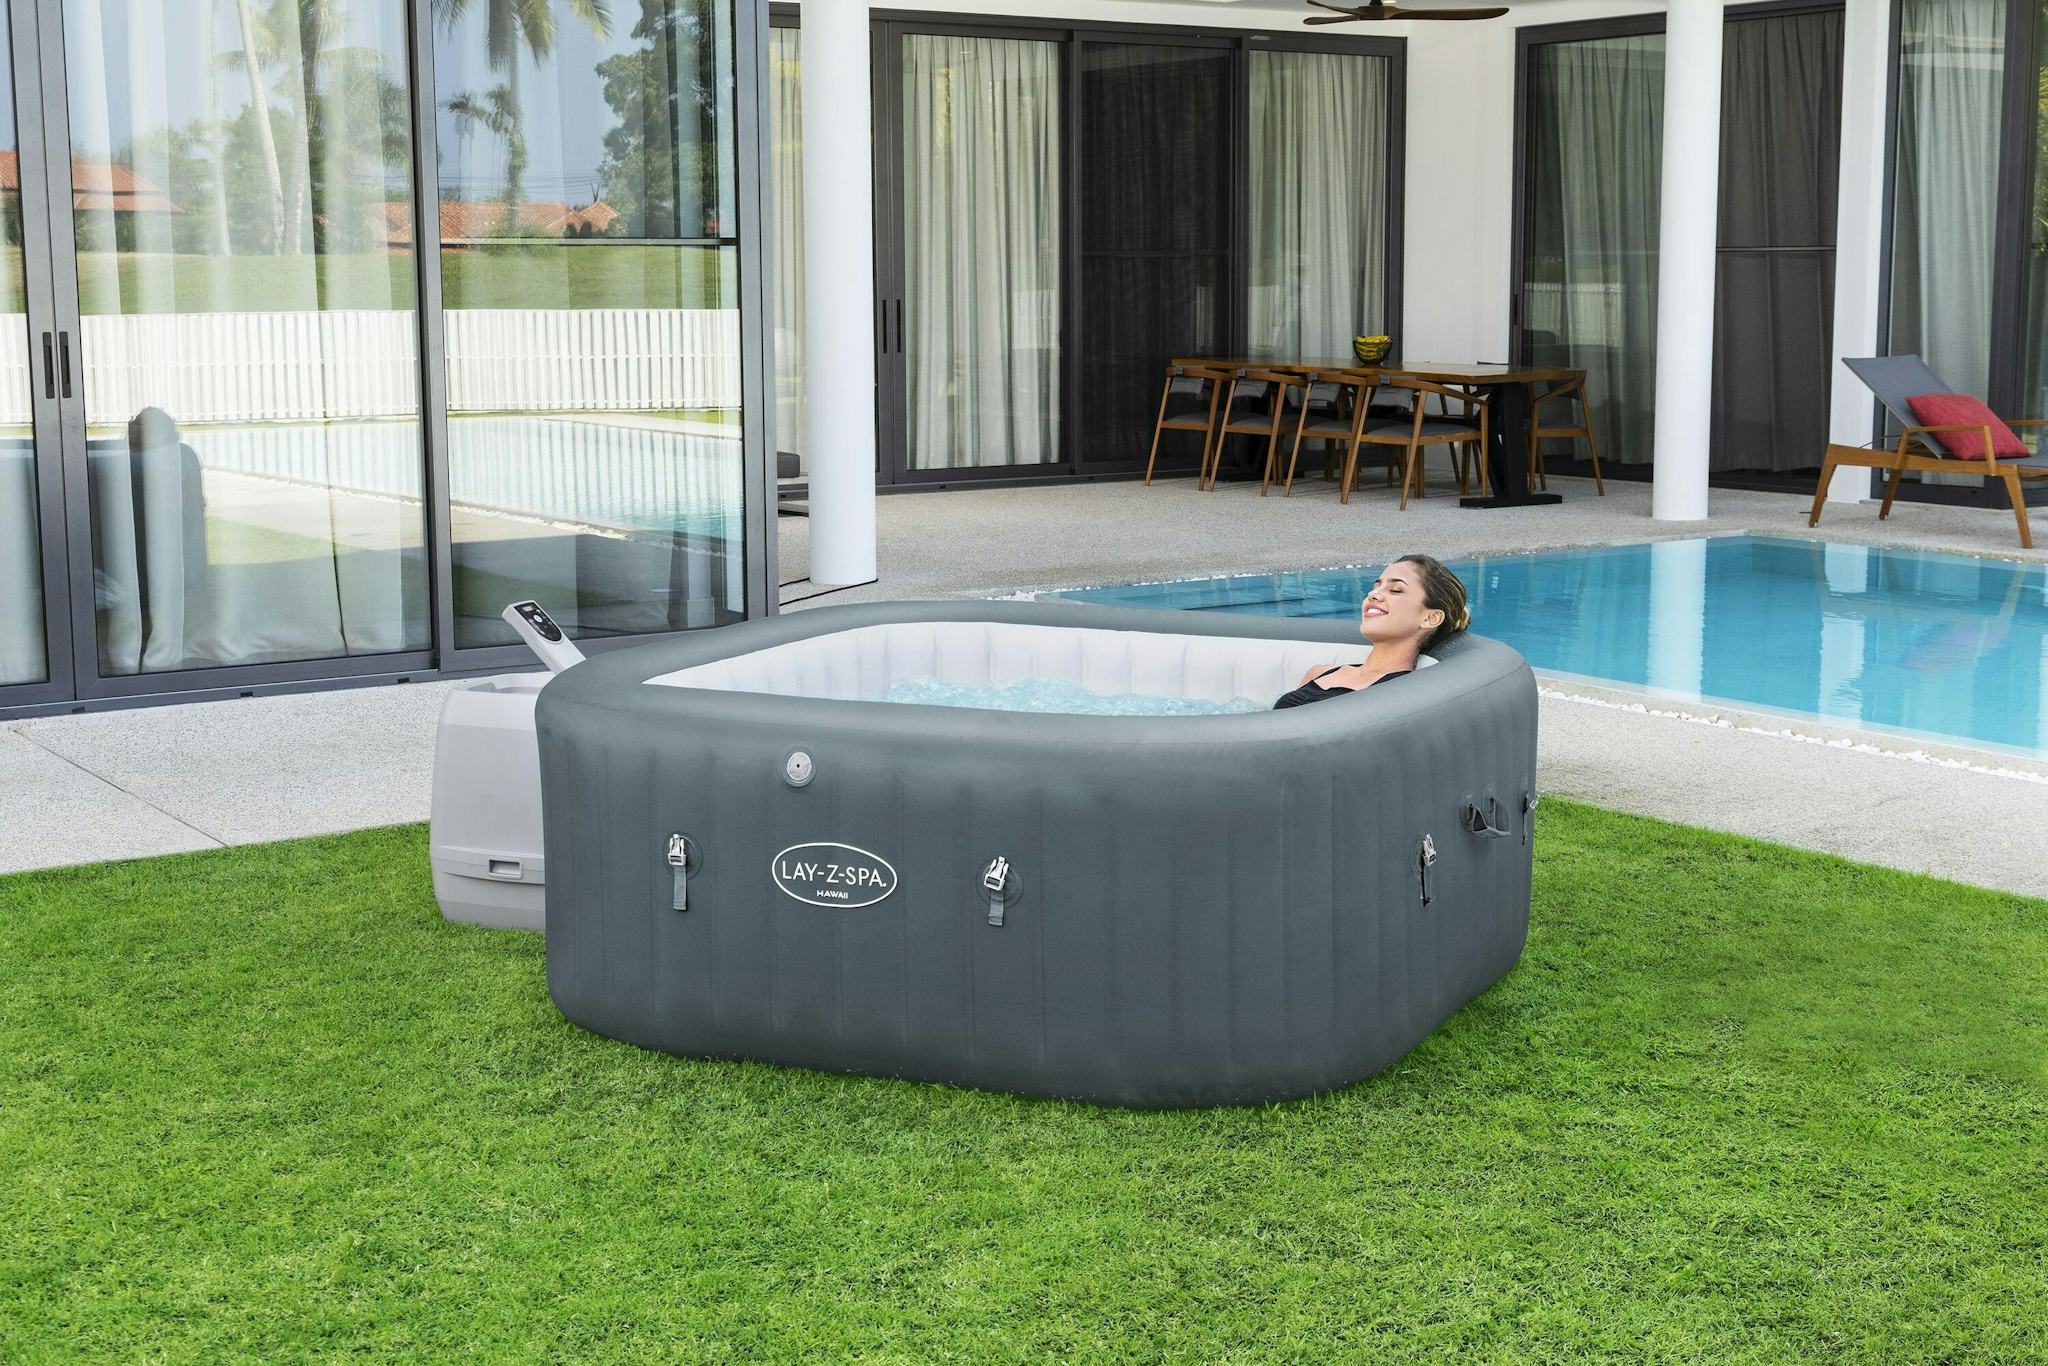 Spas Gonflables Spa gonflable carré Lay-Z-Spa Hawaii Hydrojet Pro™ 4 - 6 personnes Bestway 11